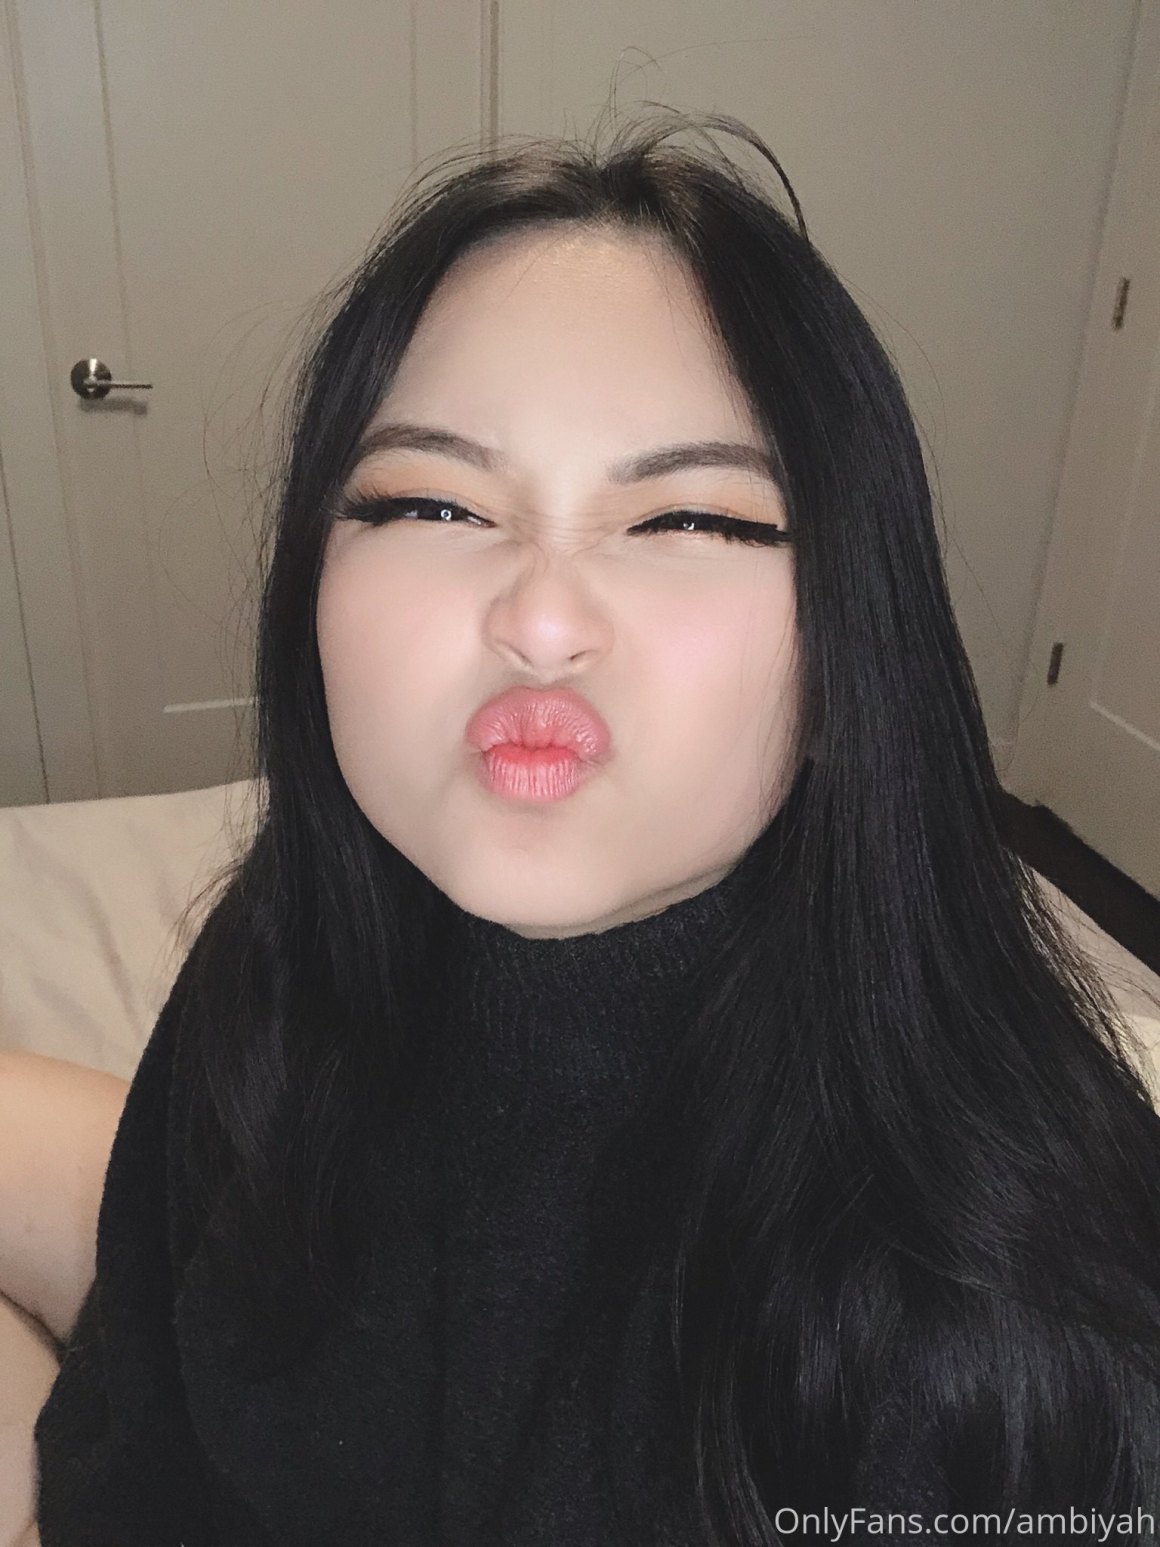 AsianOnlyfans 72 047 425 20220225